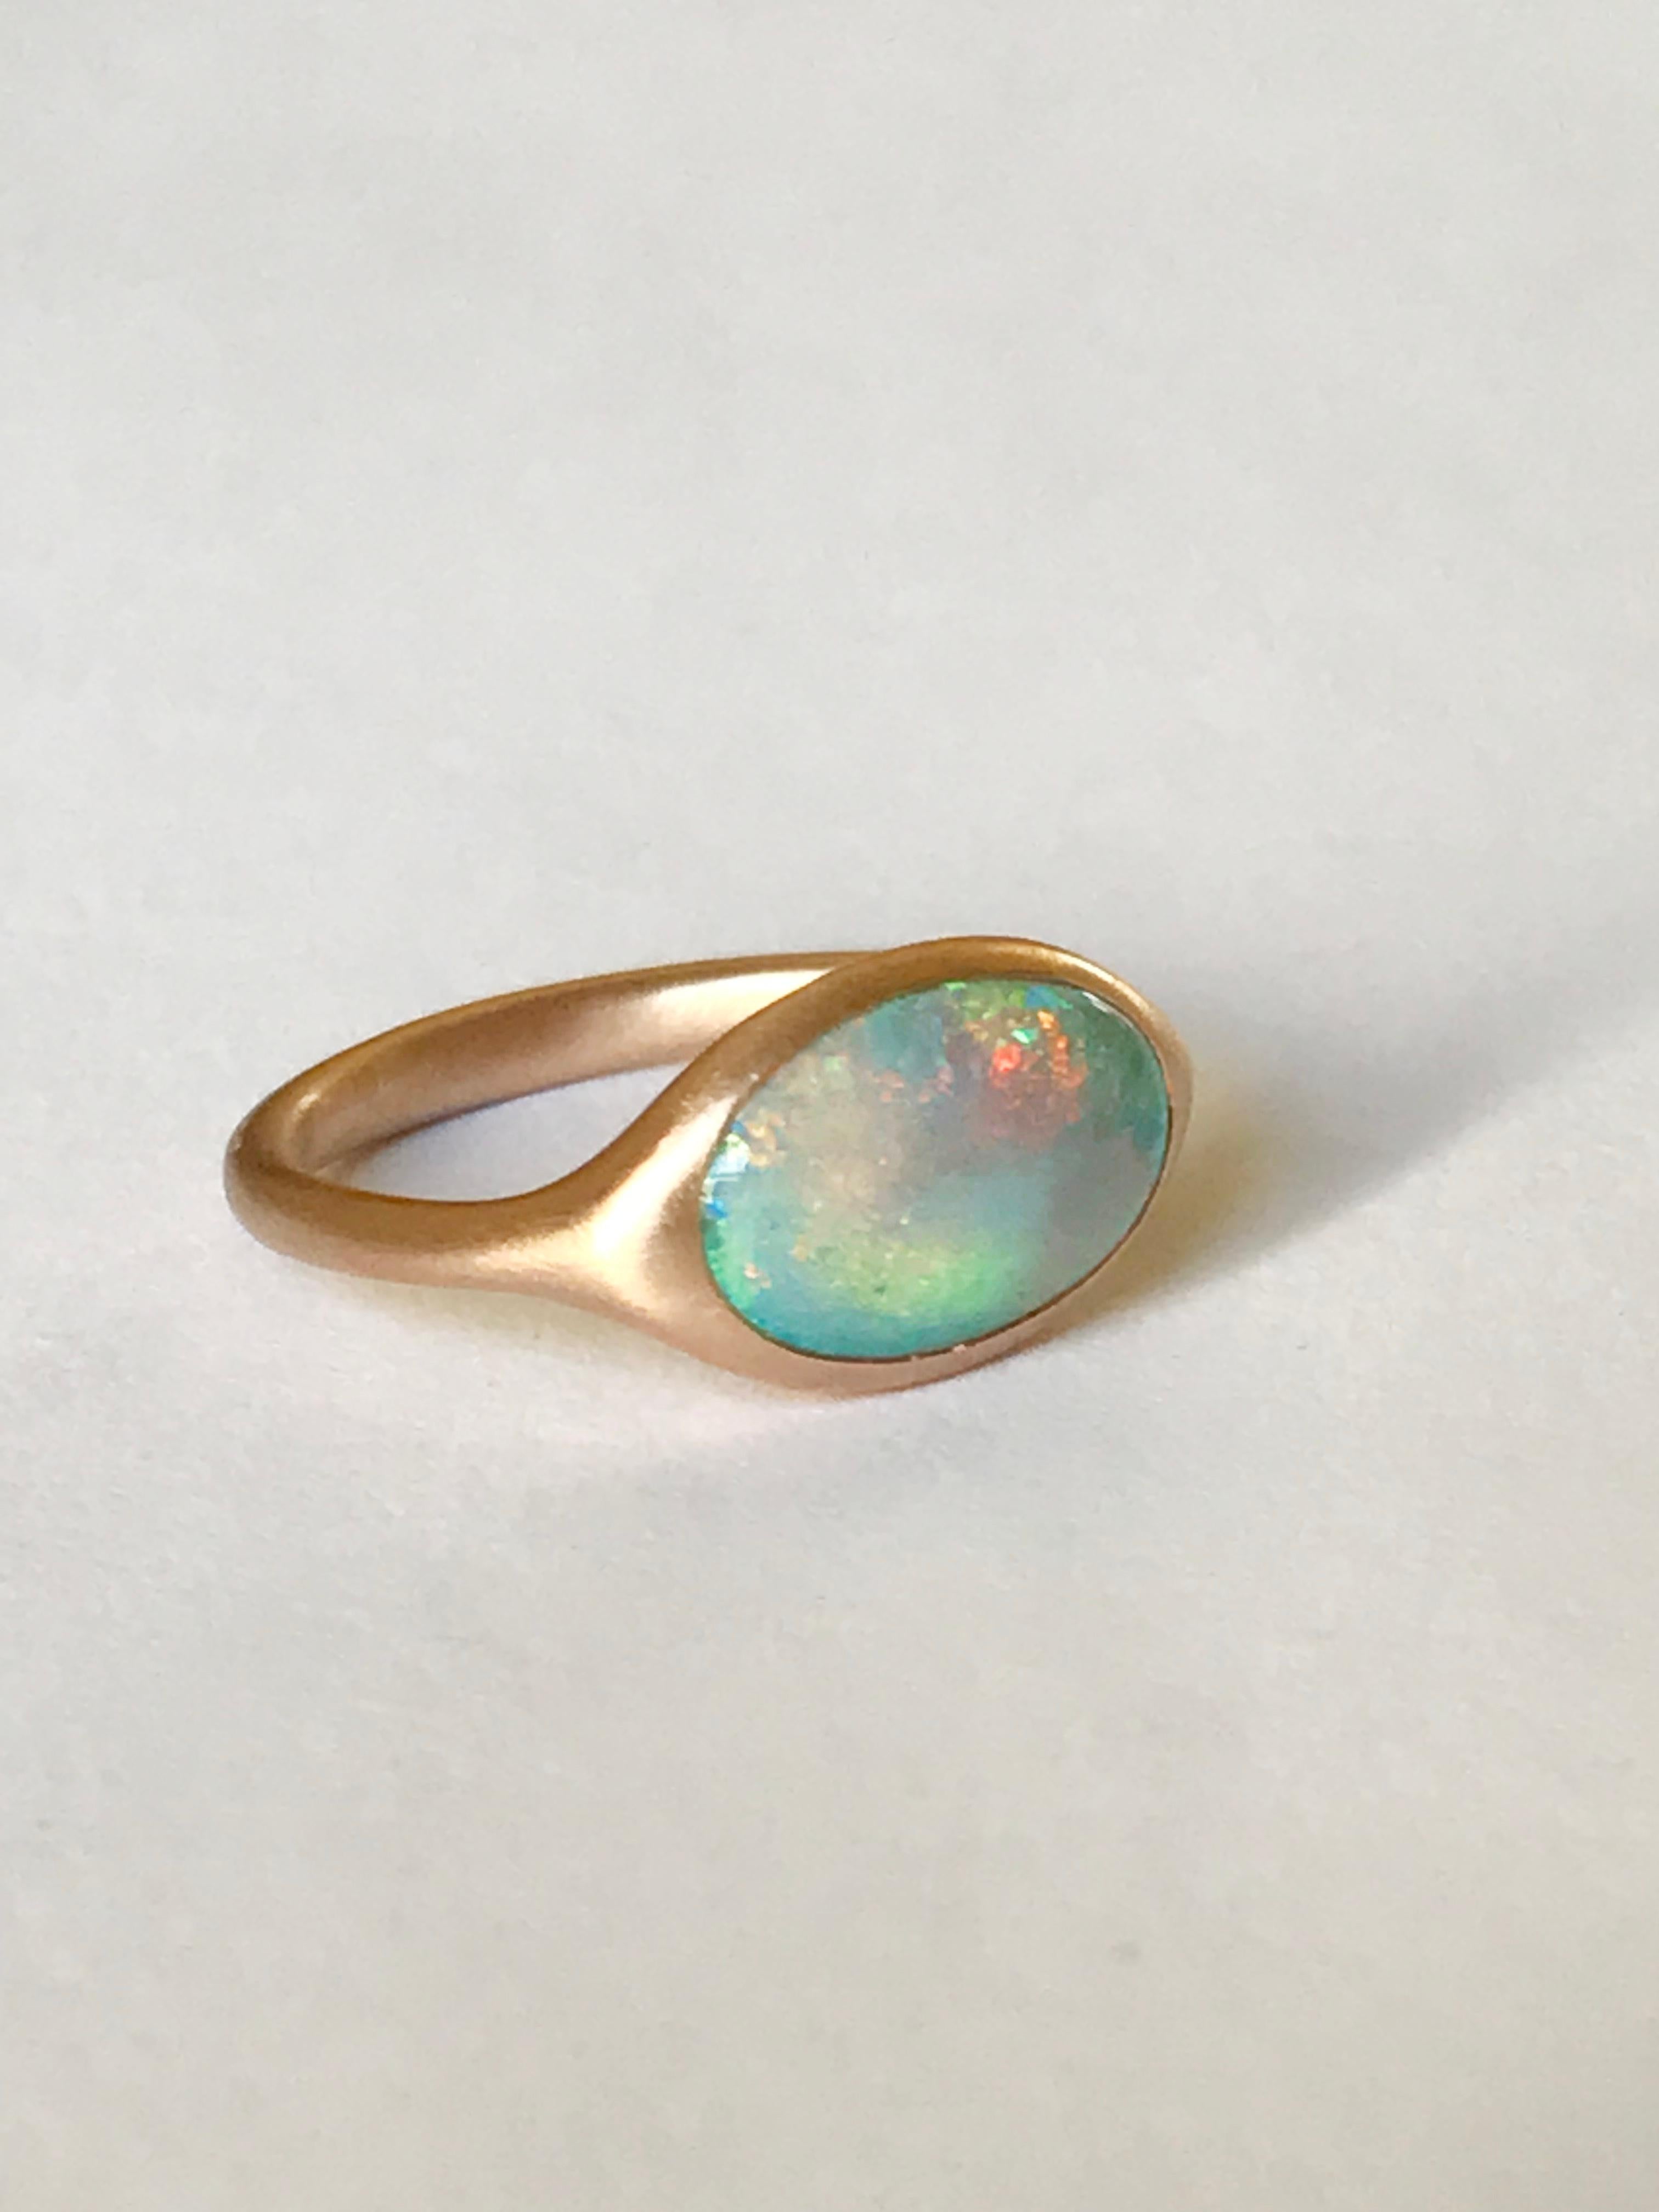 Dalben design 18k rose gold satin finishing ring with a 1,73 carat bezel-set oval shape Australian crystal opal from Lighting Ridge mine . 
Ring size US 6 3/4 - EU 54 re-sizable to most finger sizes. 
Bezel setting dimension: 
width 14 mm, 
height